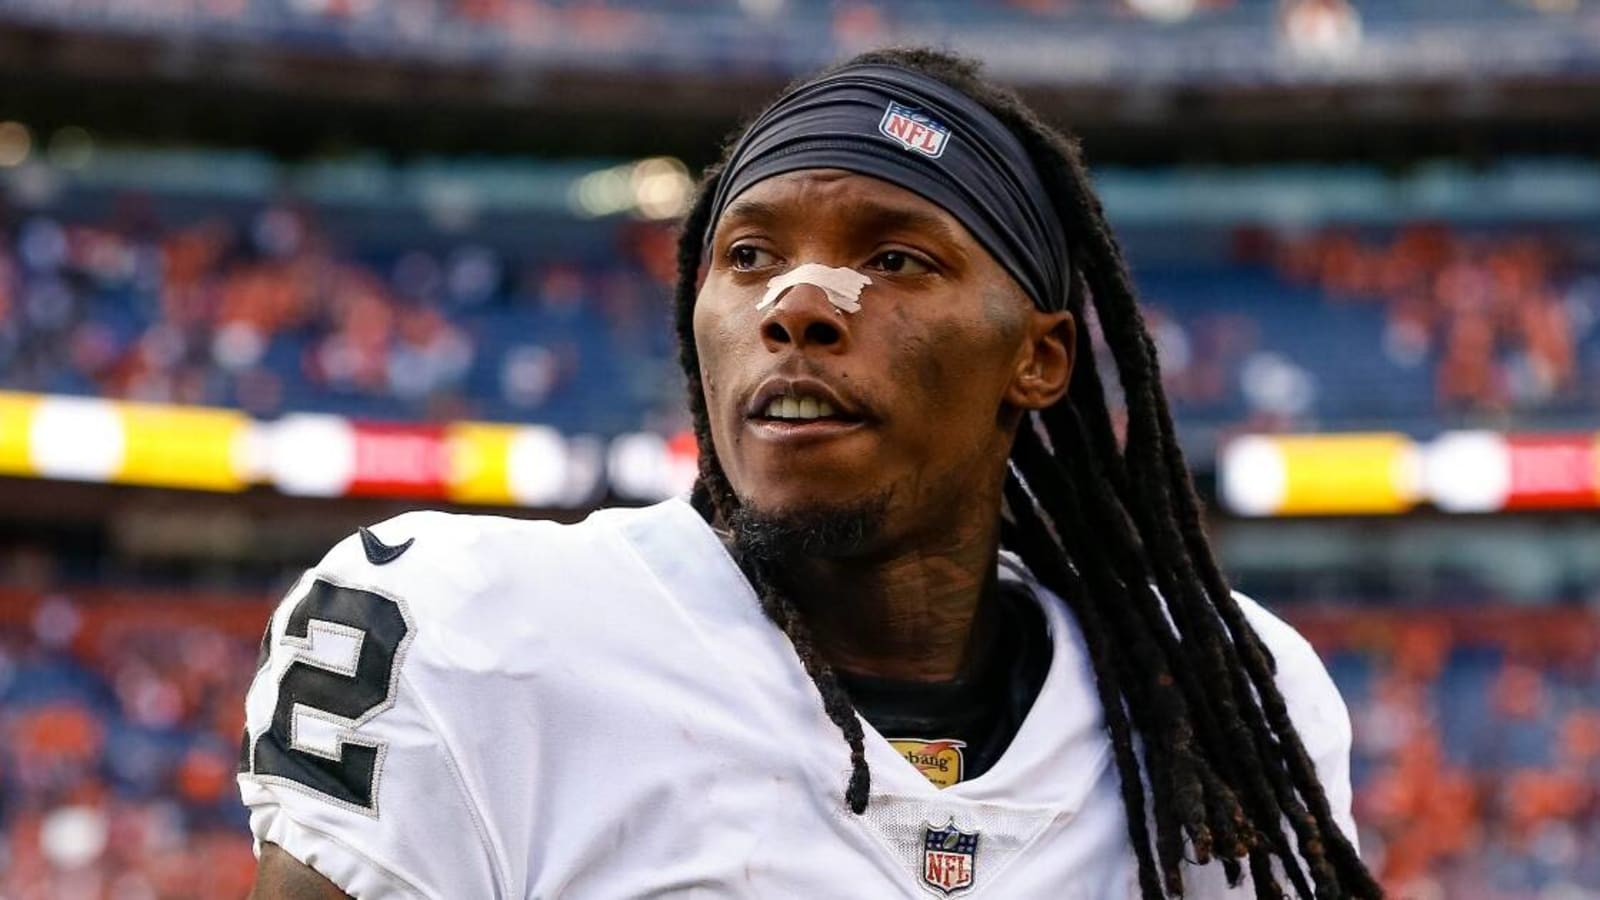 Martavis Bryant after signing with Cowboys: ‘Sky’s the limit for me’